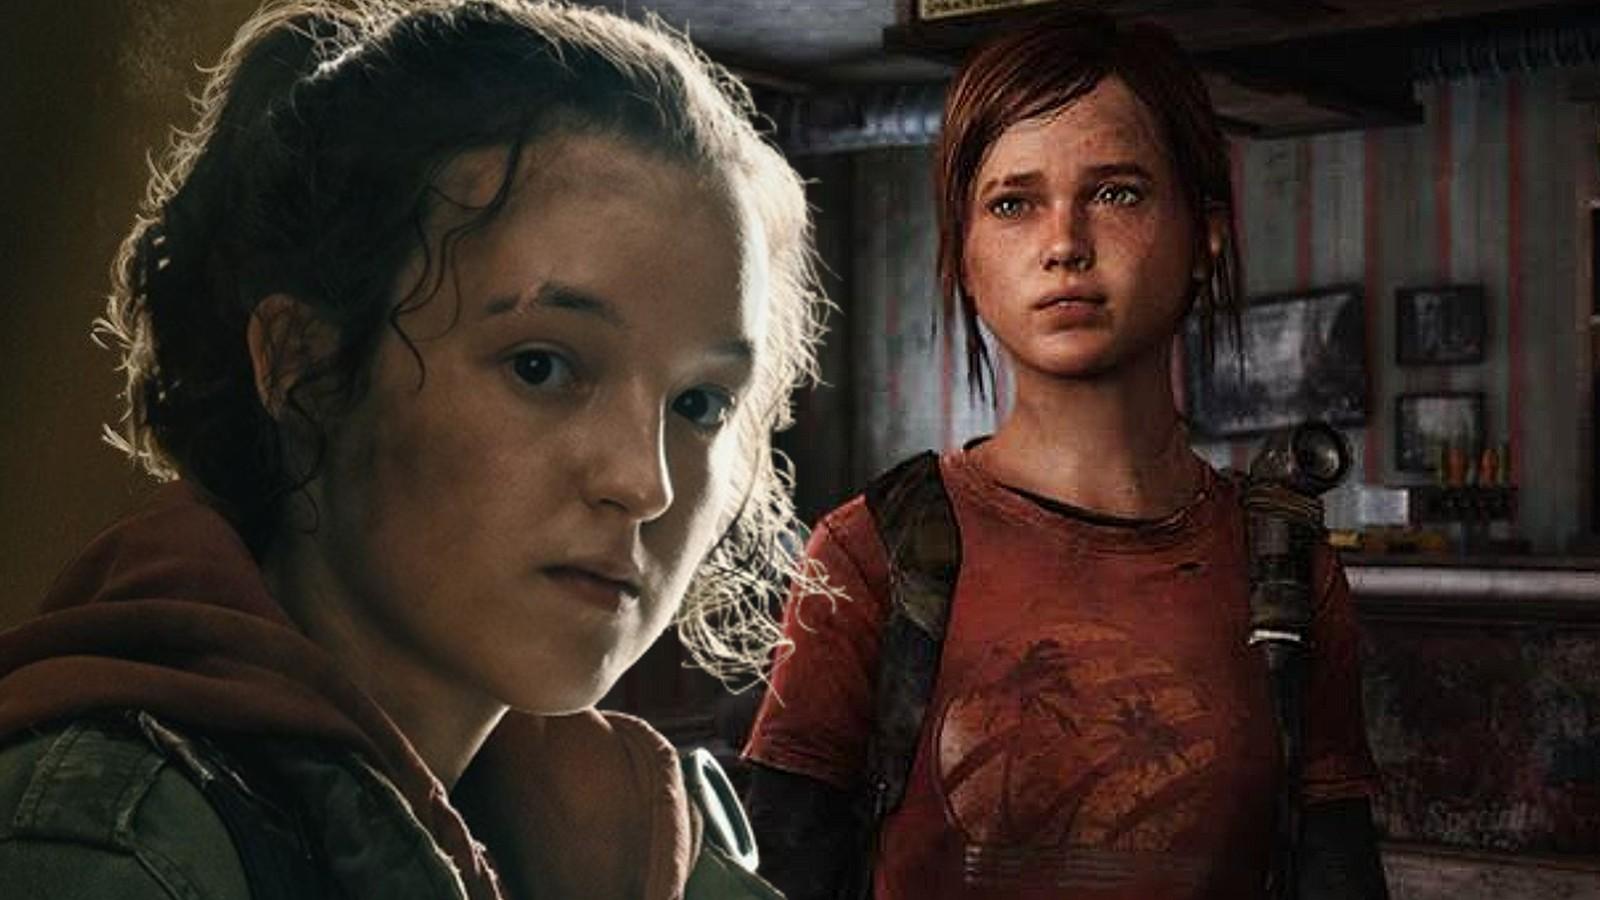 The Last of Us' multiplayer game will be out when it's ready